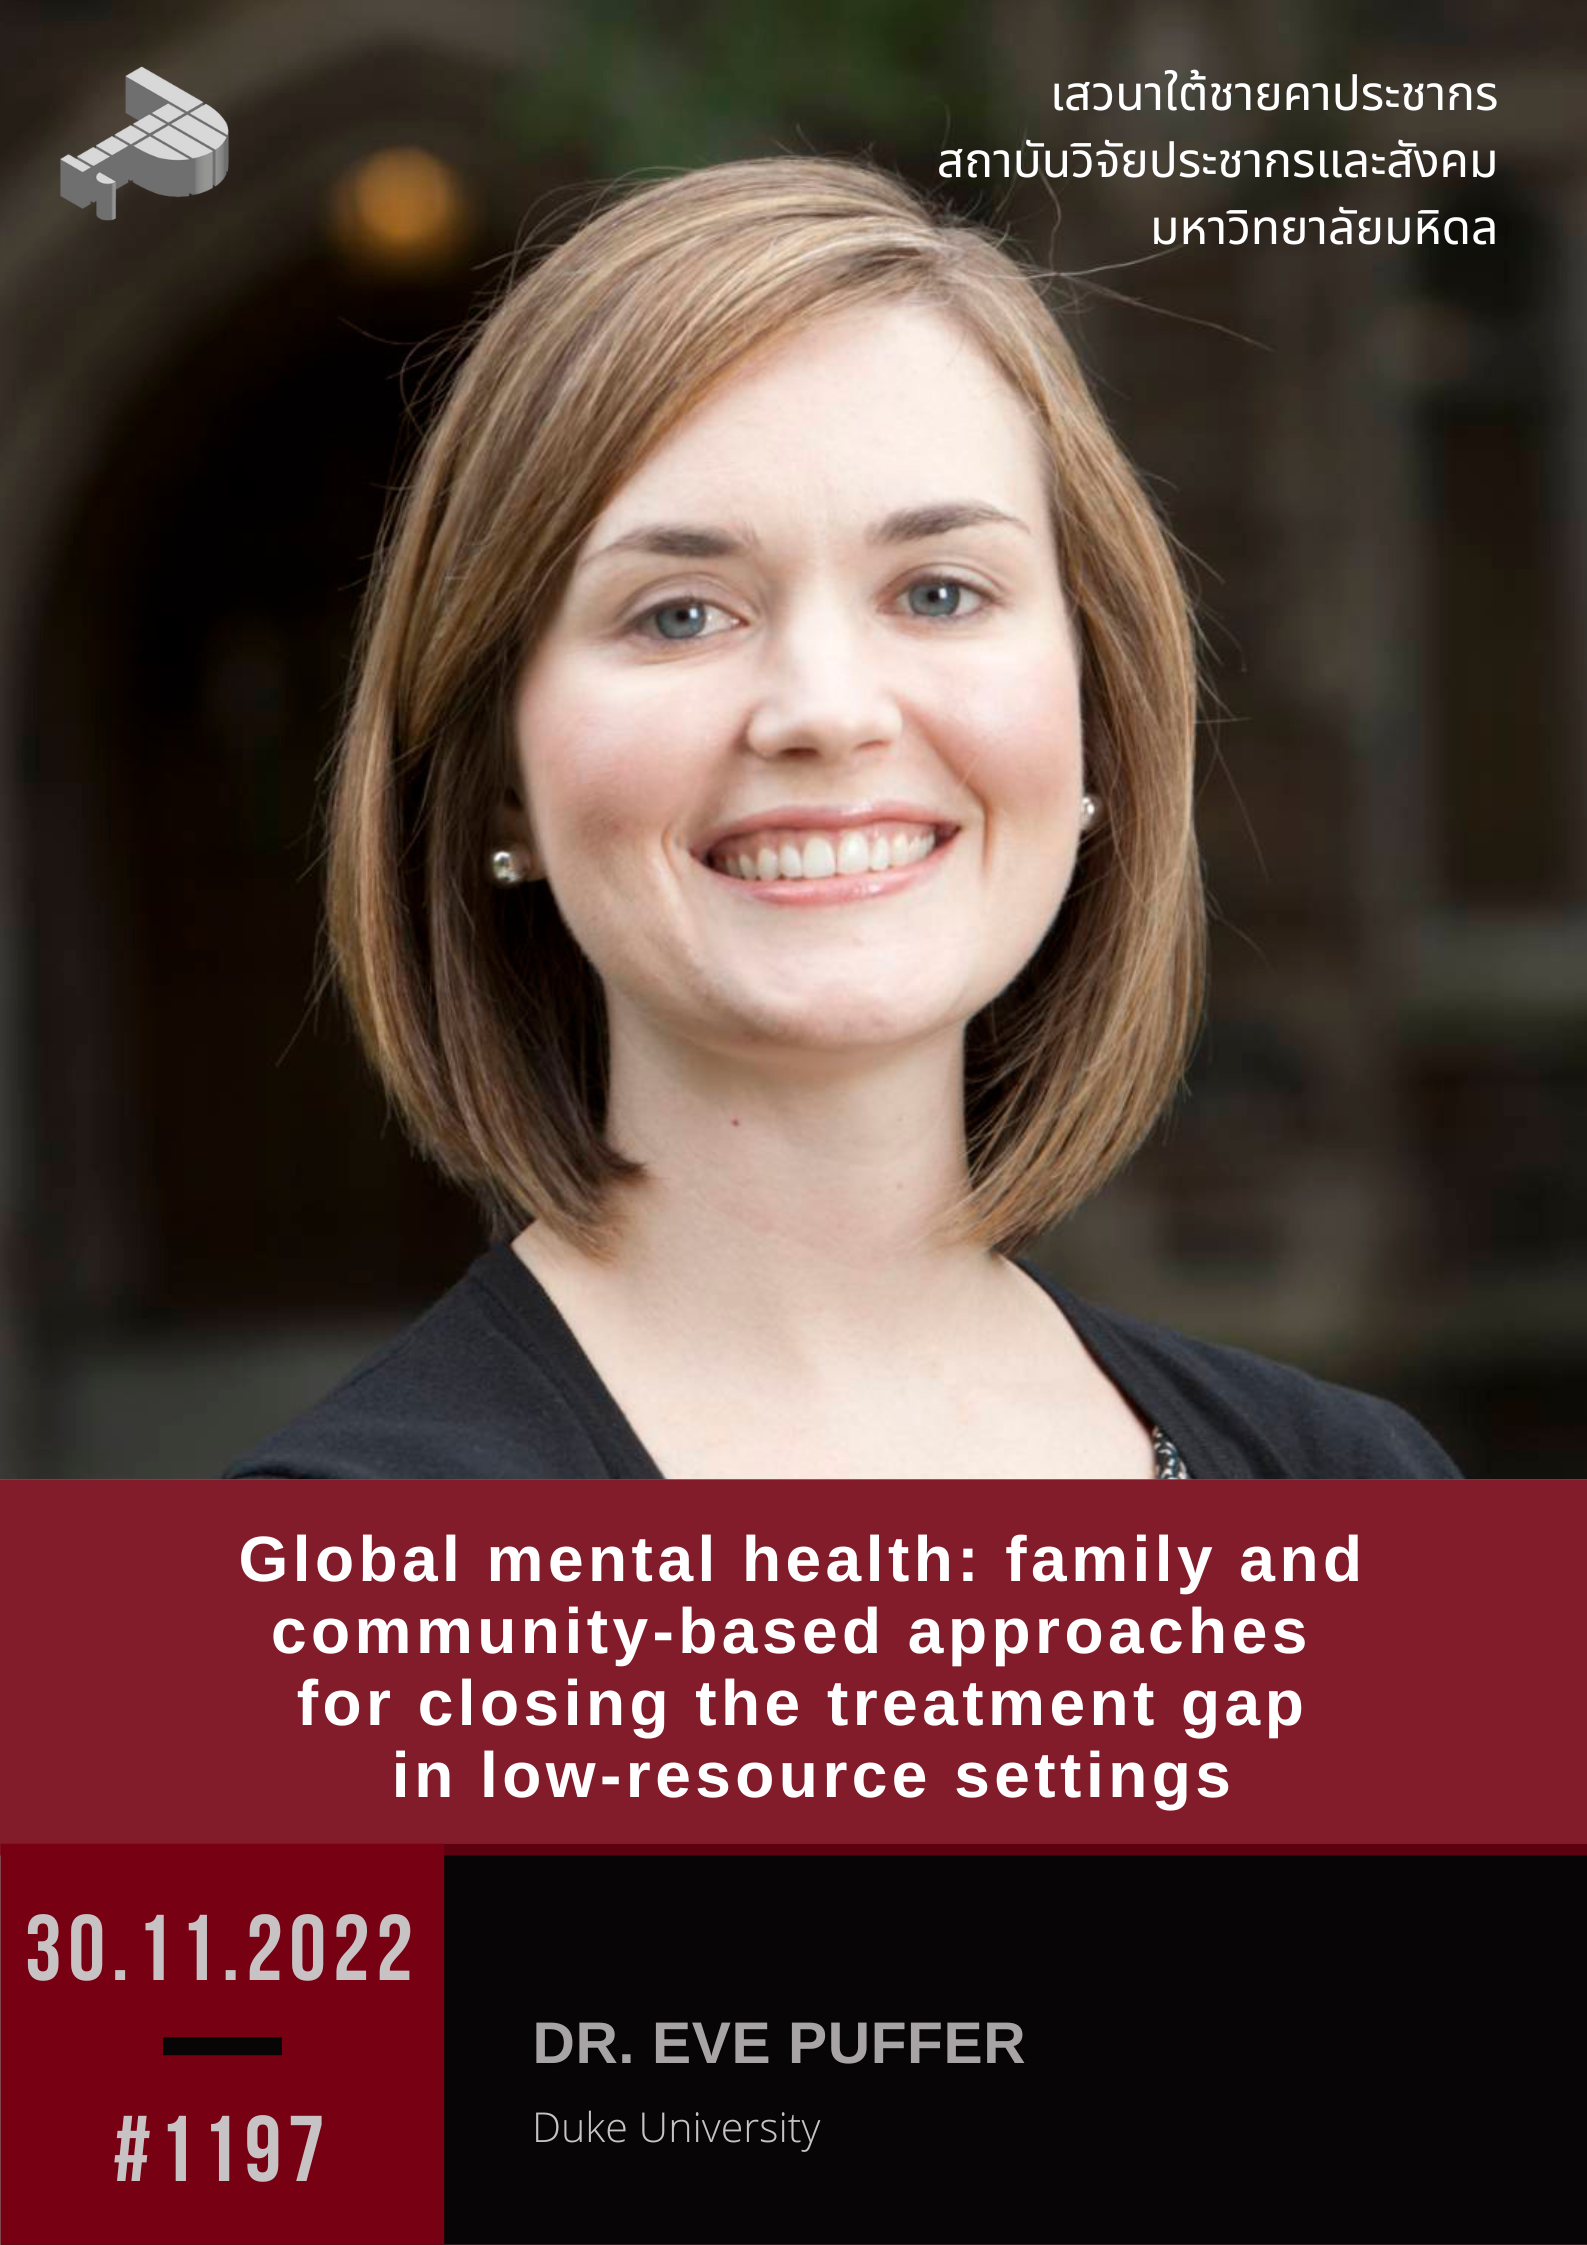 Global mental health: family and community-based approaches for closing the treatment gap in low-resource settings